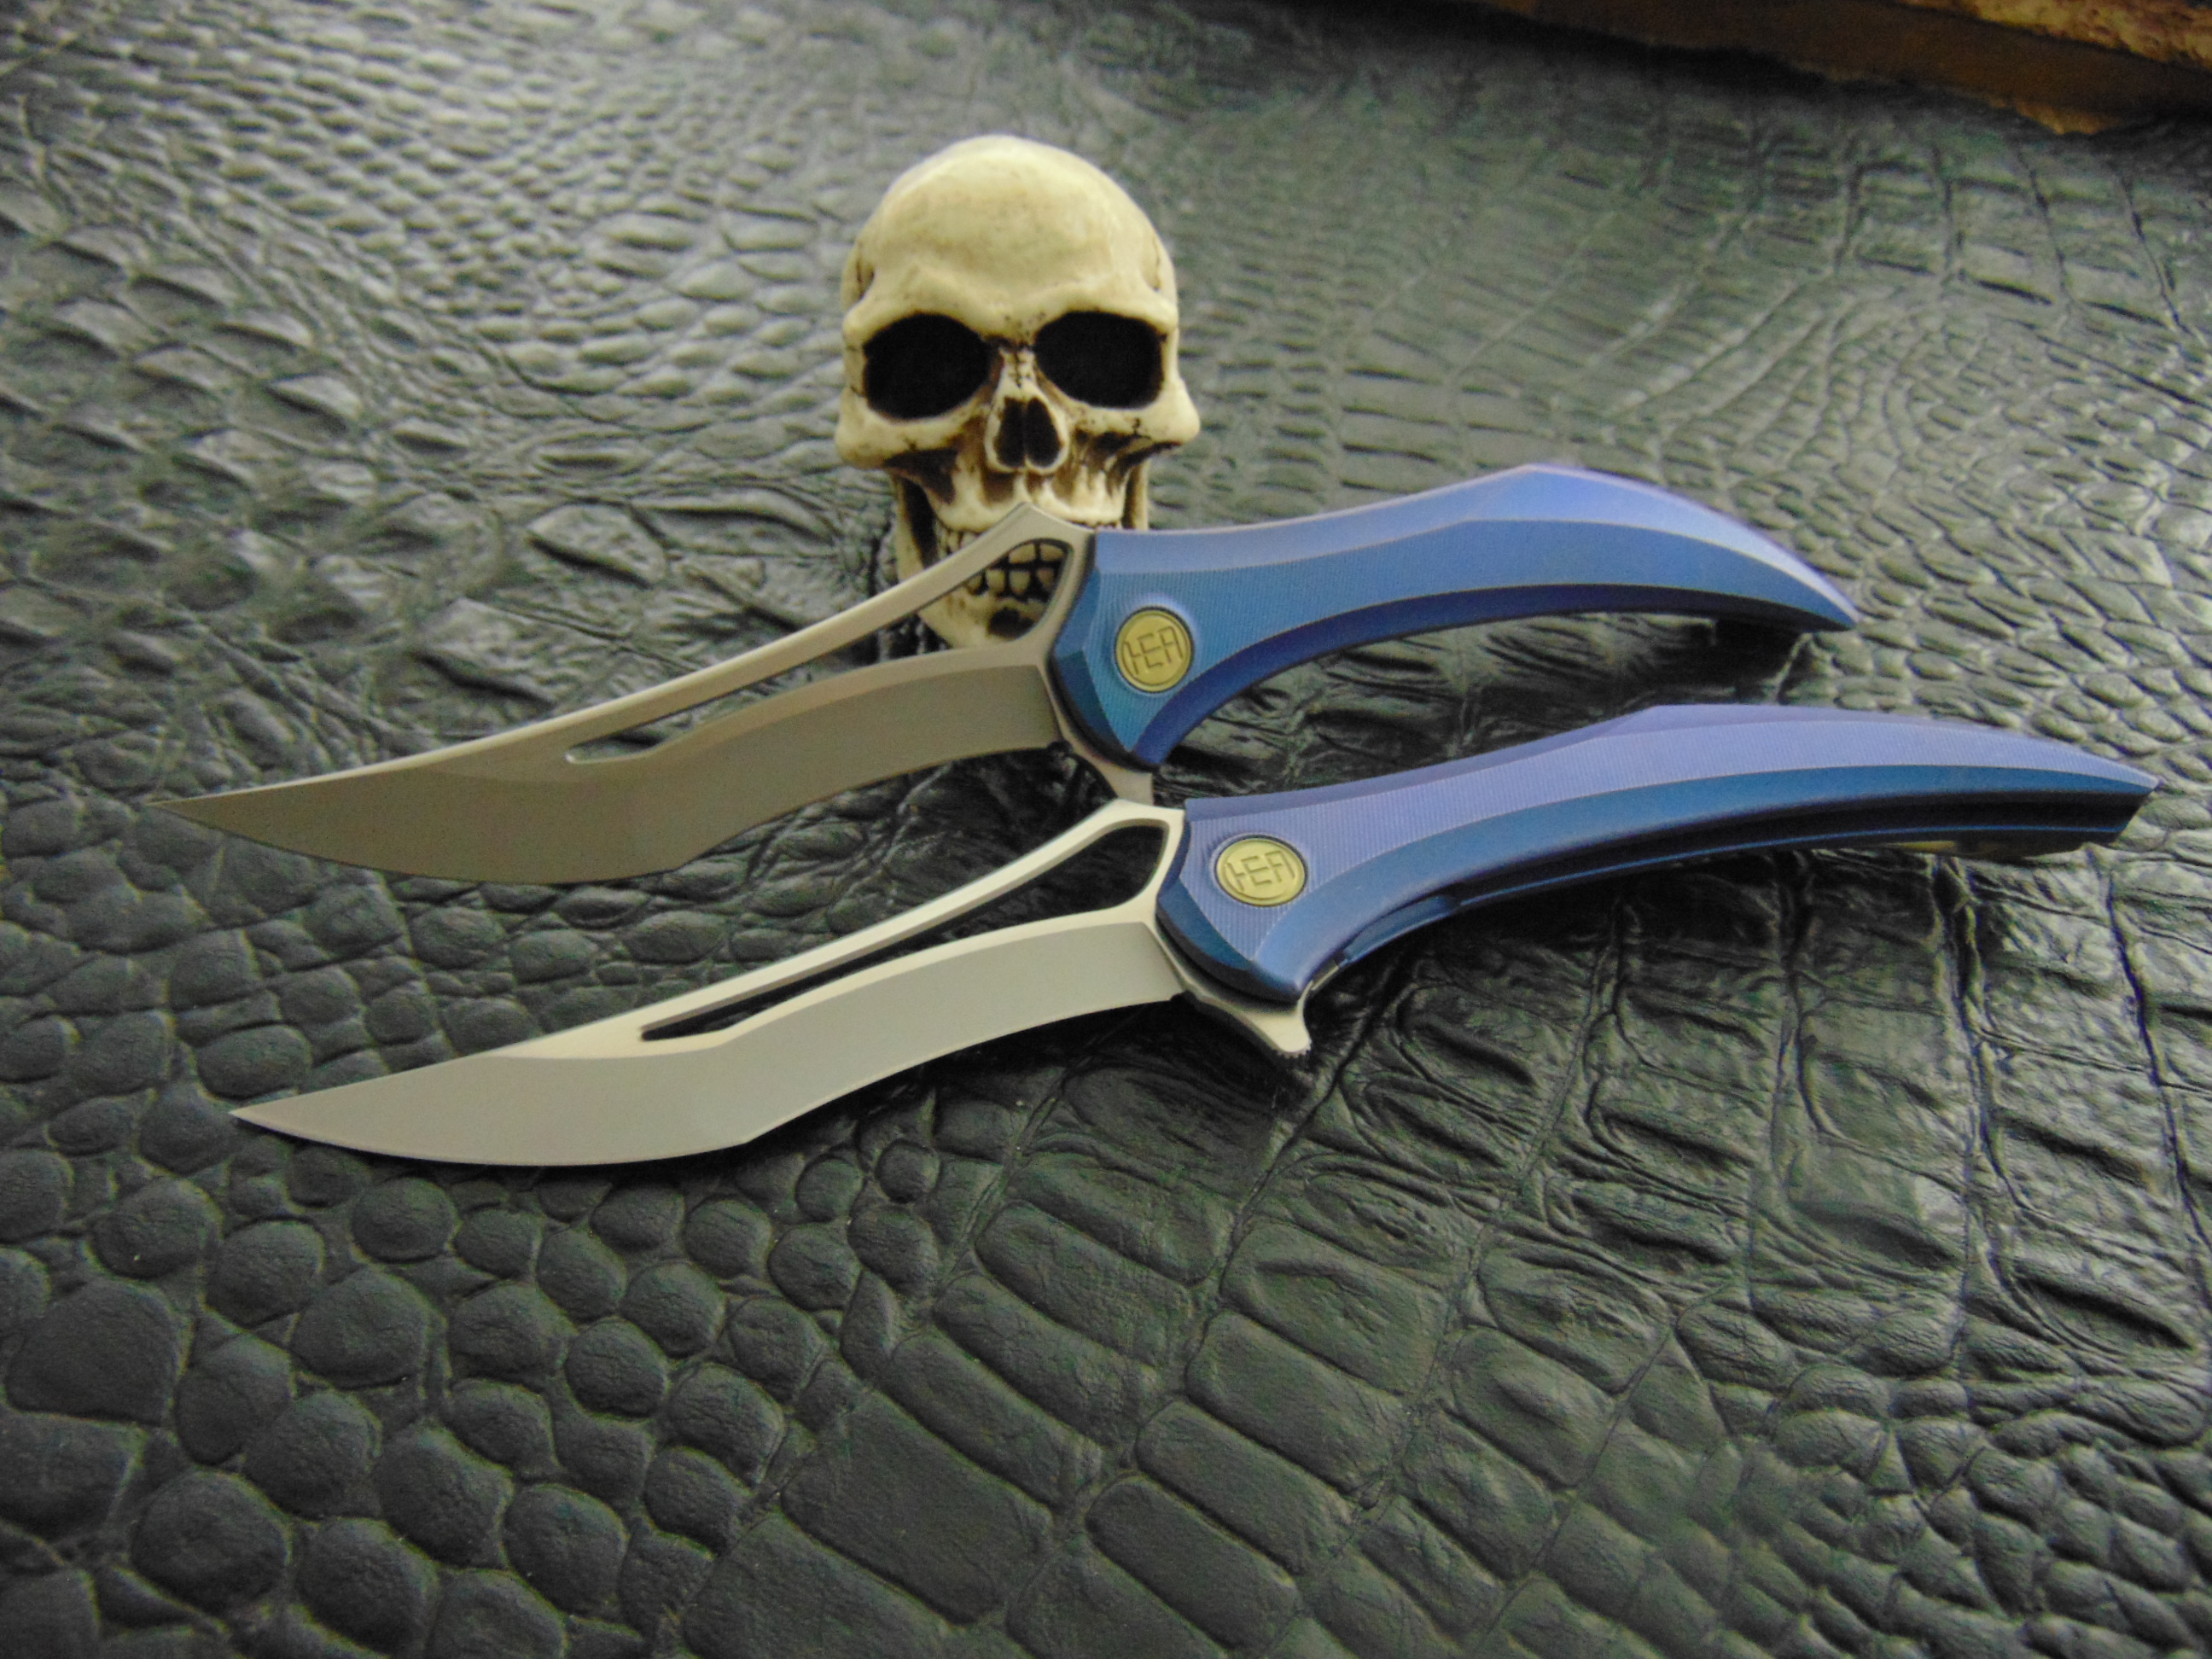 HEAdesigns 1 of 99 Integral Titanium Flame Anodized Blue*SOLD*